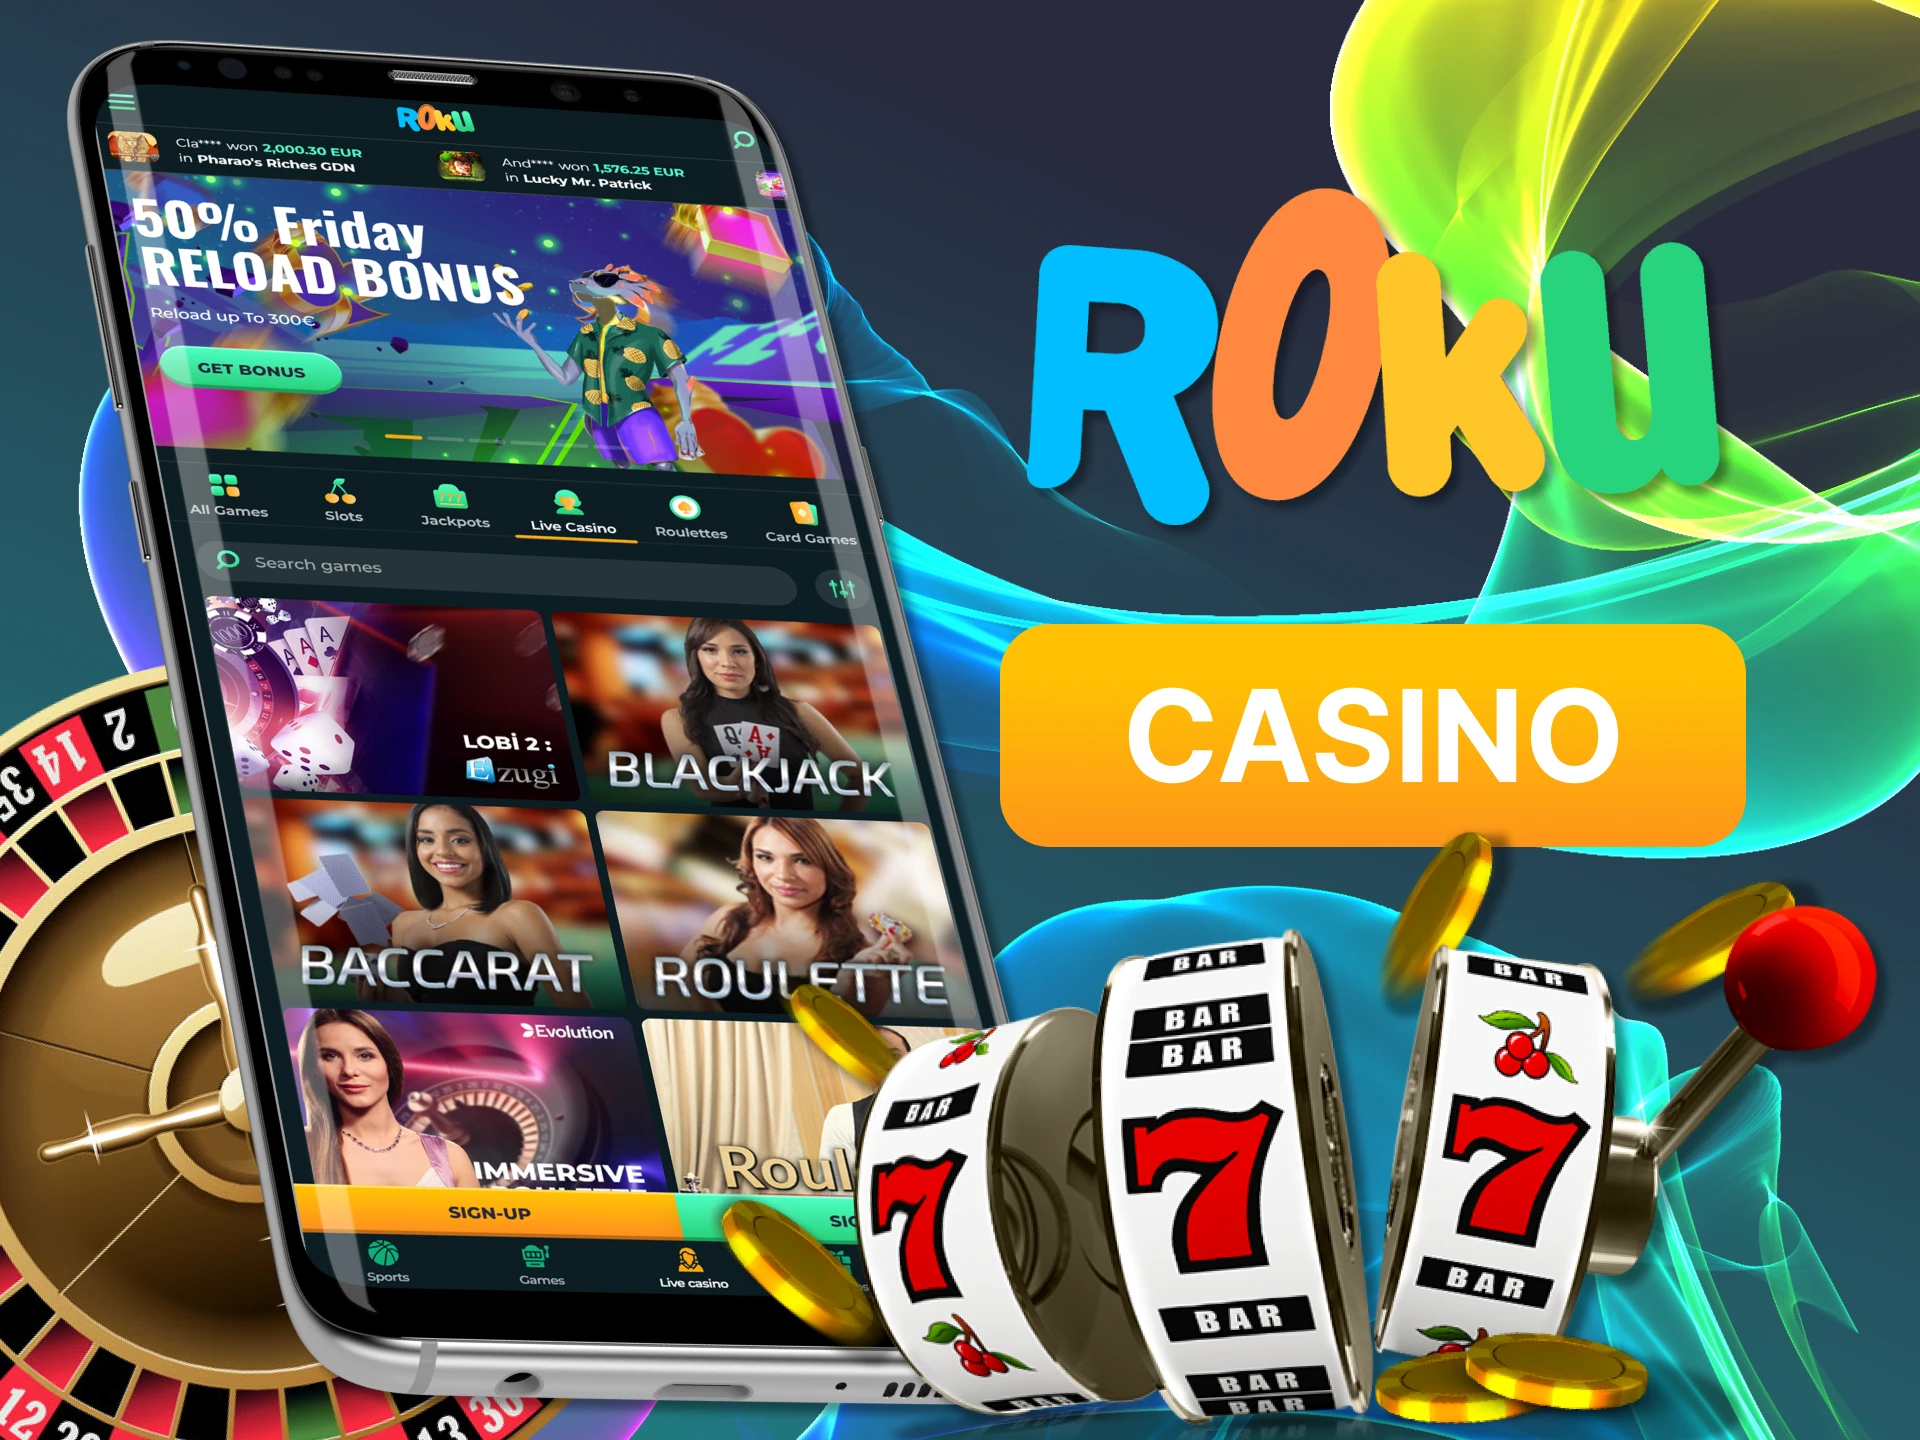 With the Rokubet app, play exciting casino games.